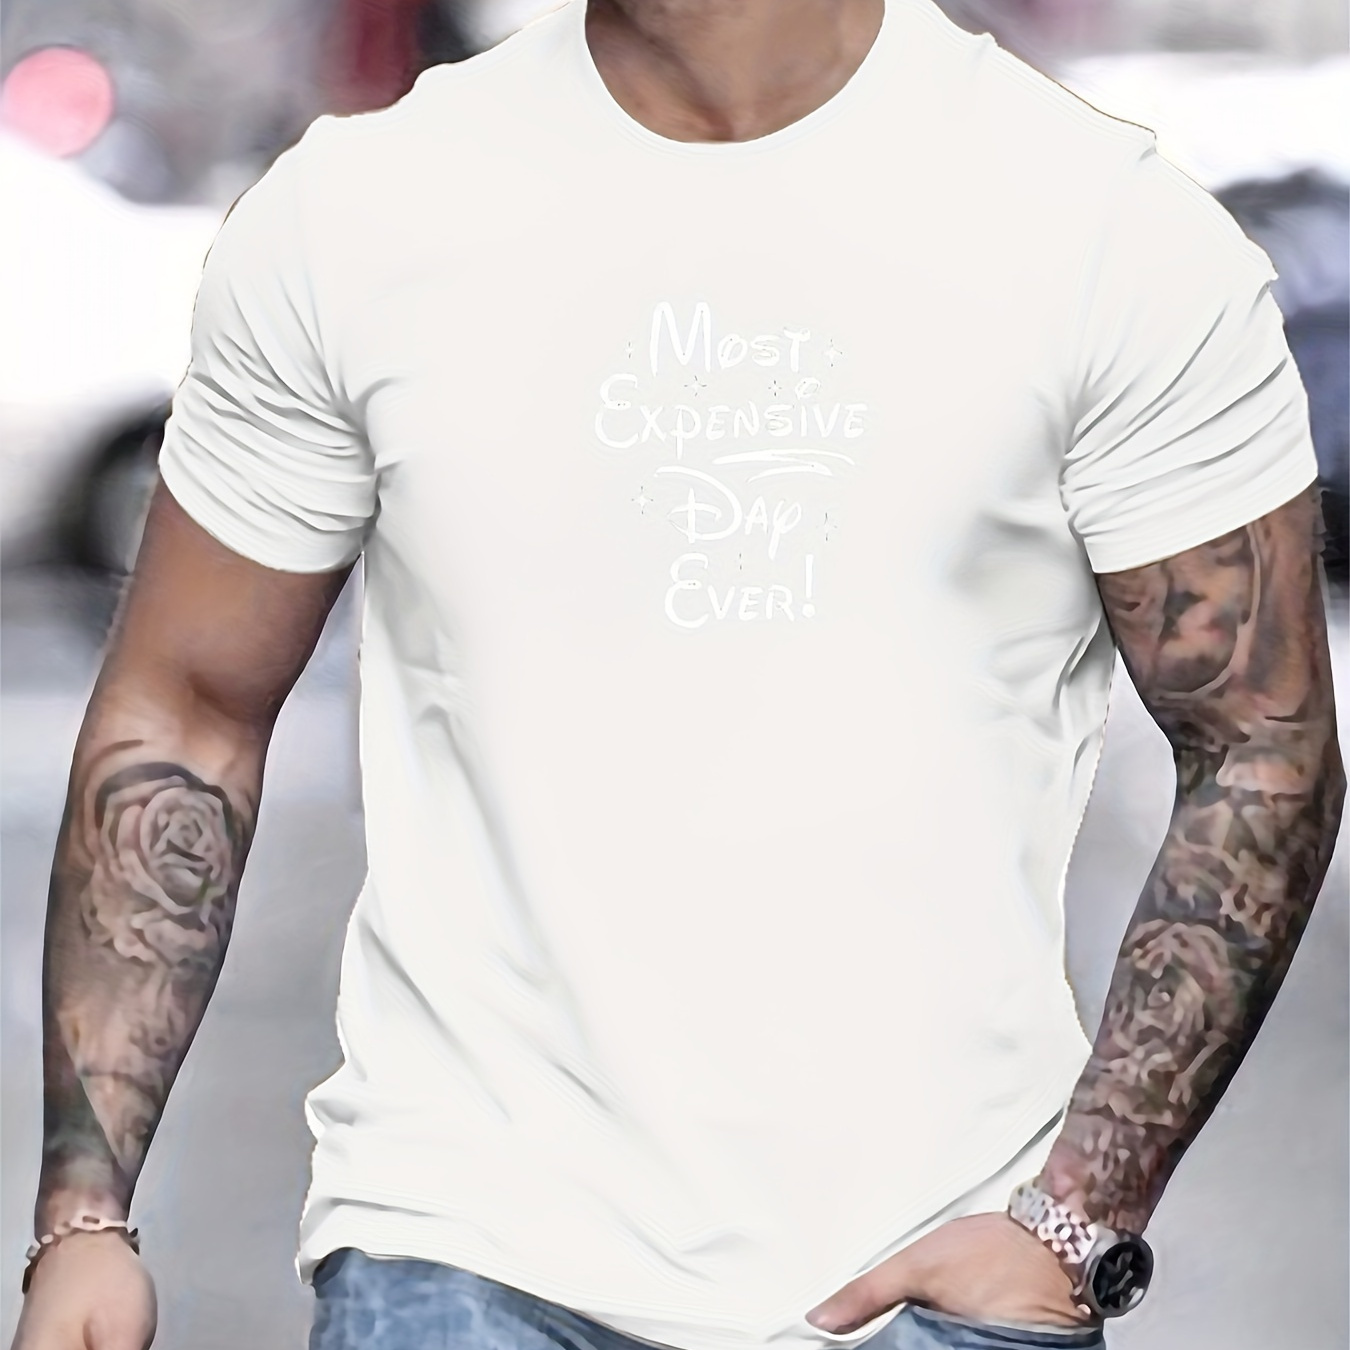 

Most Expensive Day Ever Print T-shirt, Tees For Men, Casual Short Sleeve T-shirt For Summer